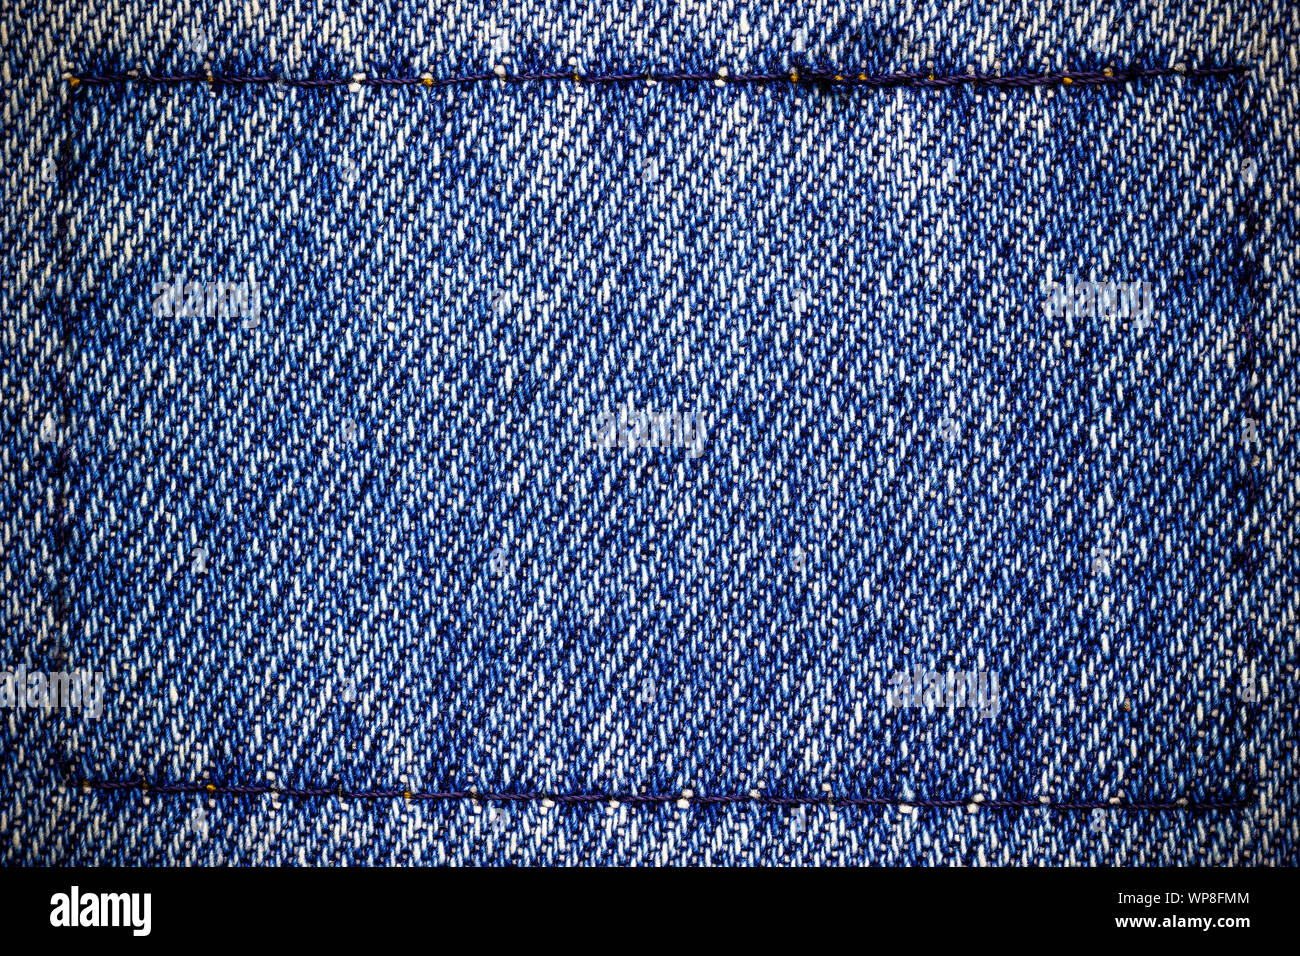 Frame or border of jeans fabric stitch. Concept of vintage clothes or fashion. Stock Photo